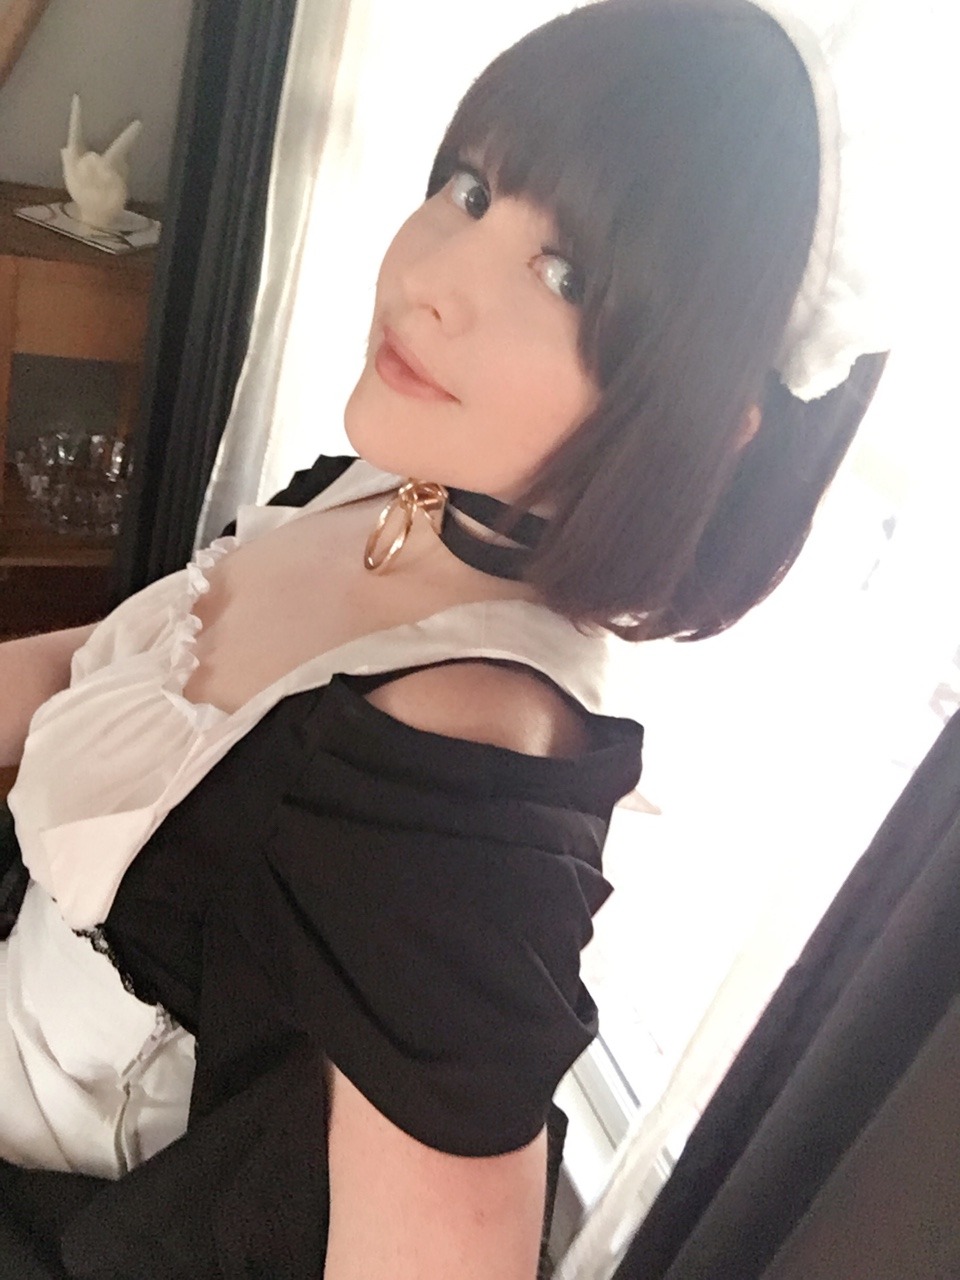 nsfwfoxydenofficial: Love maids? Well you’re in luck! Next months Patreon exclusive